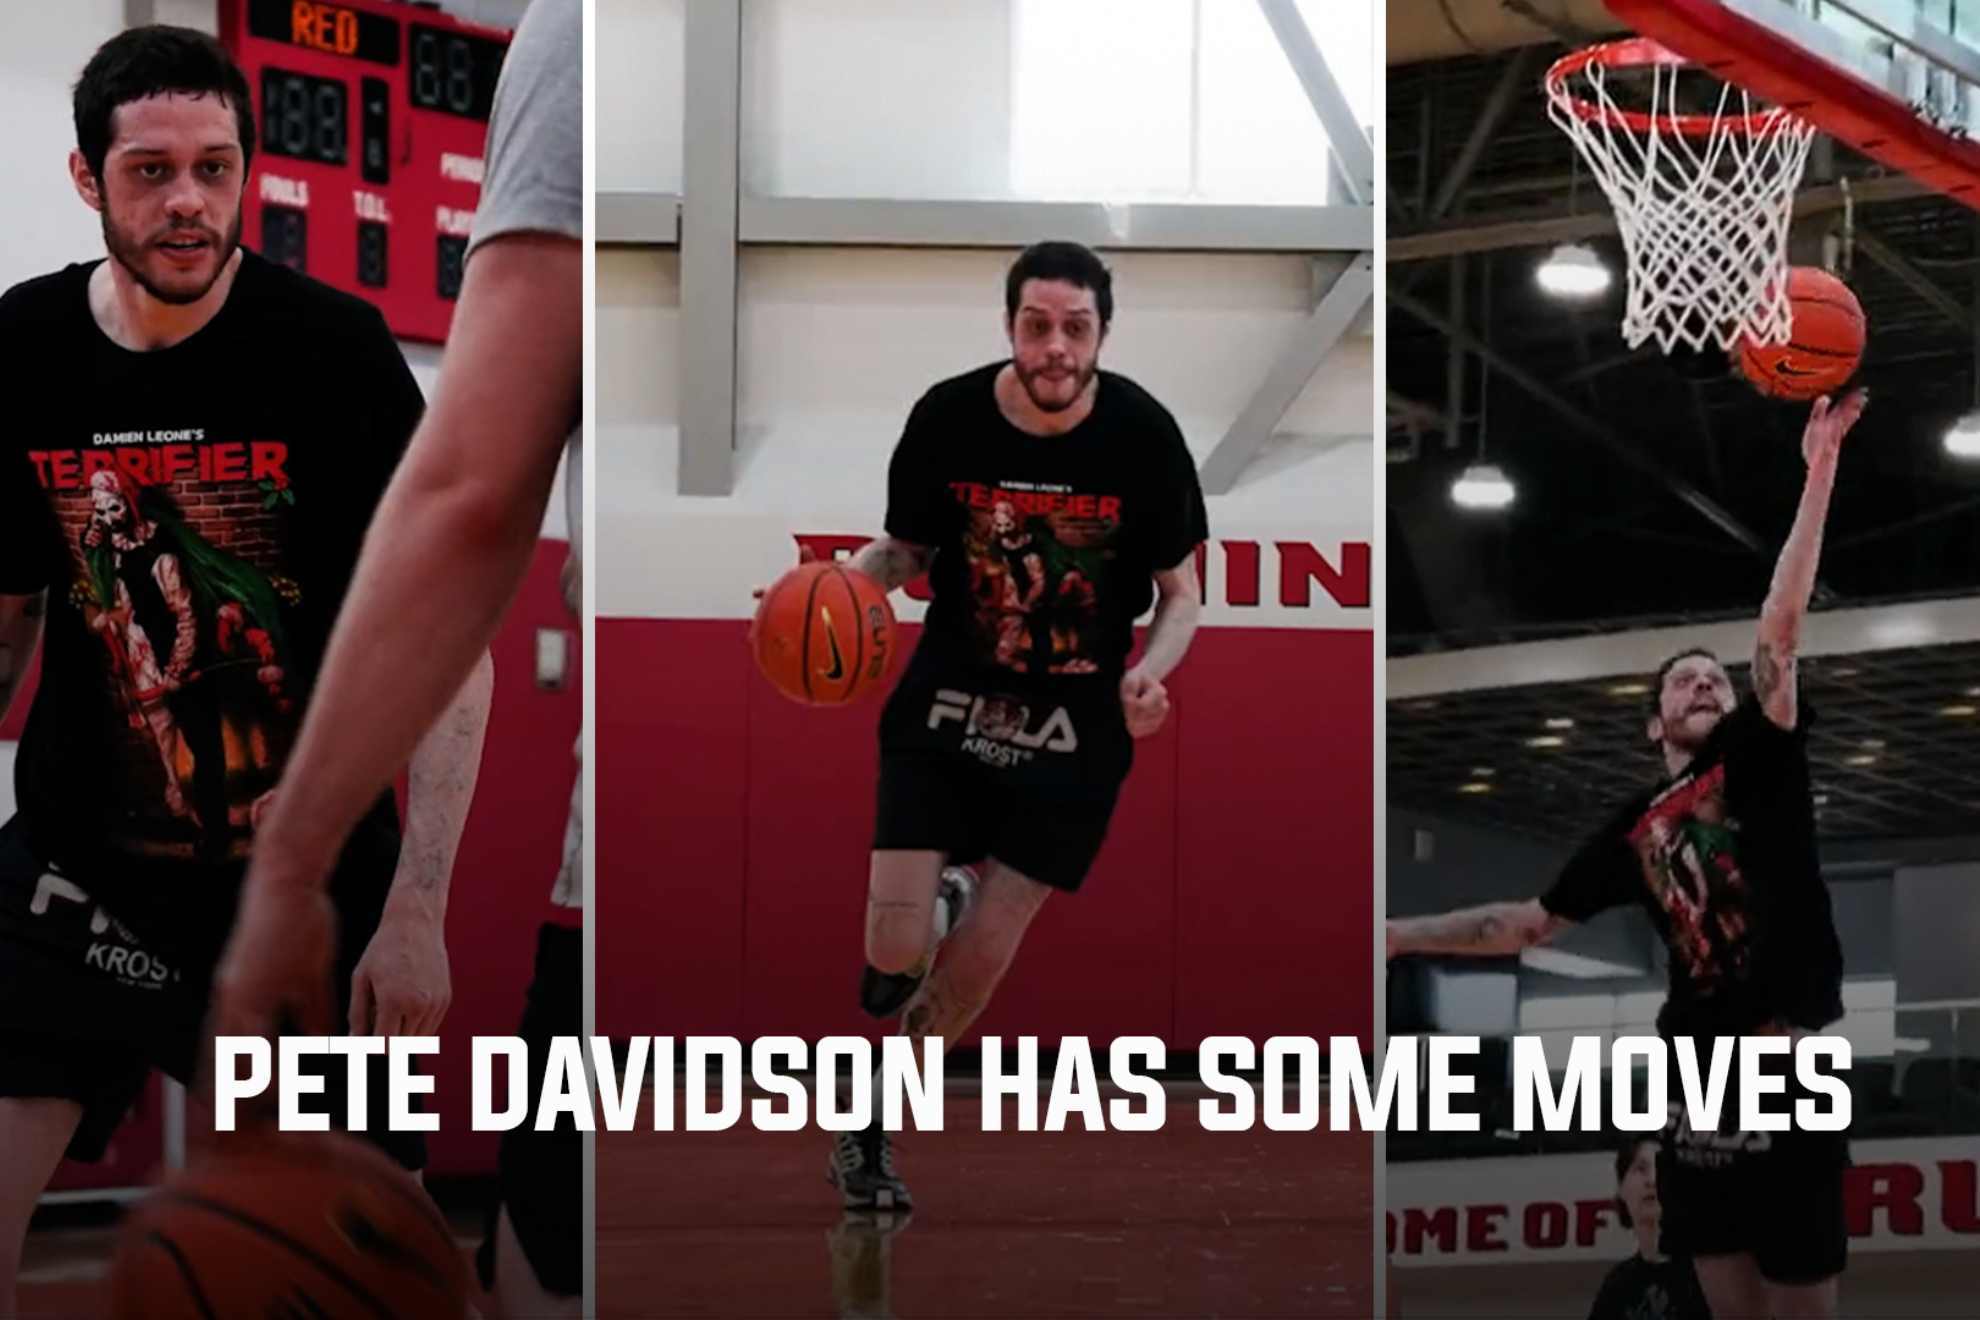 Pete Davidson showed of basketball skills in a pick-up game at UNLV.